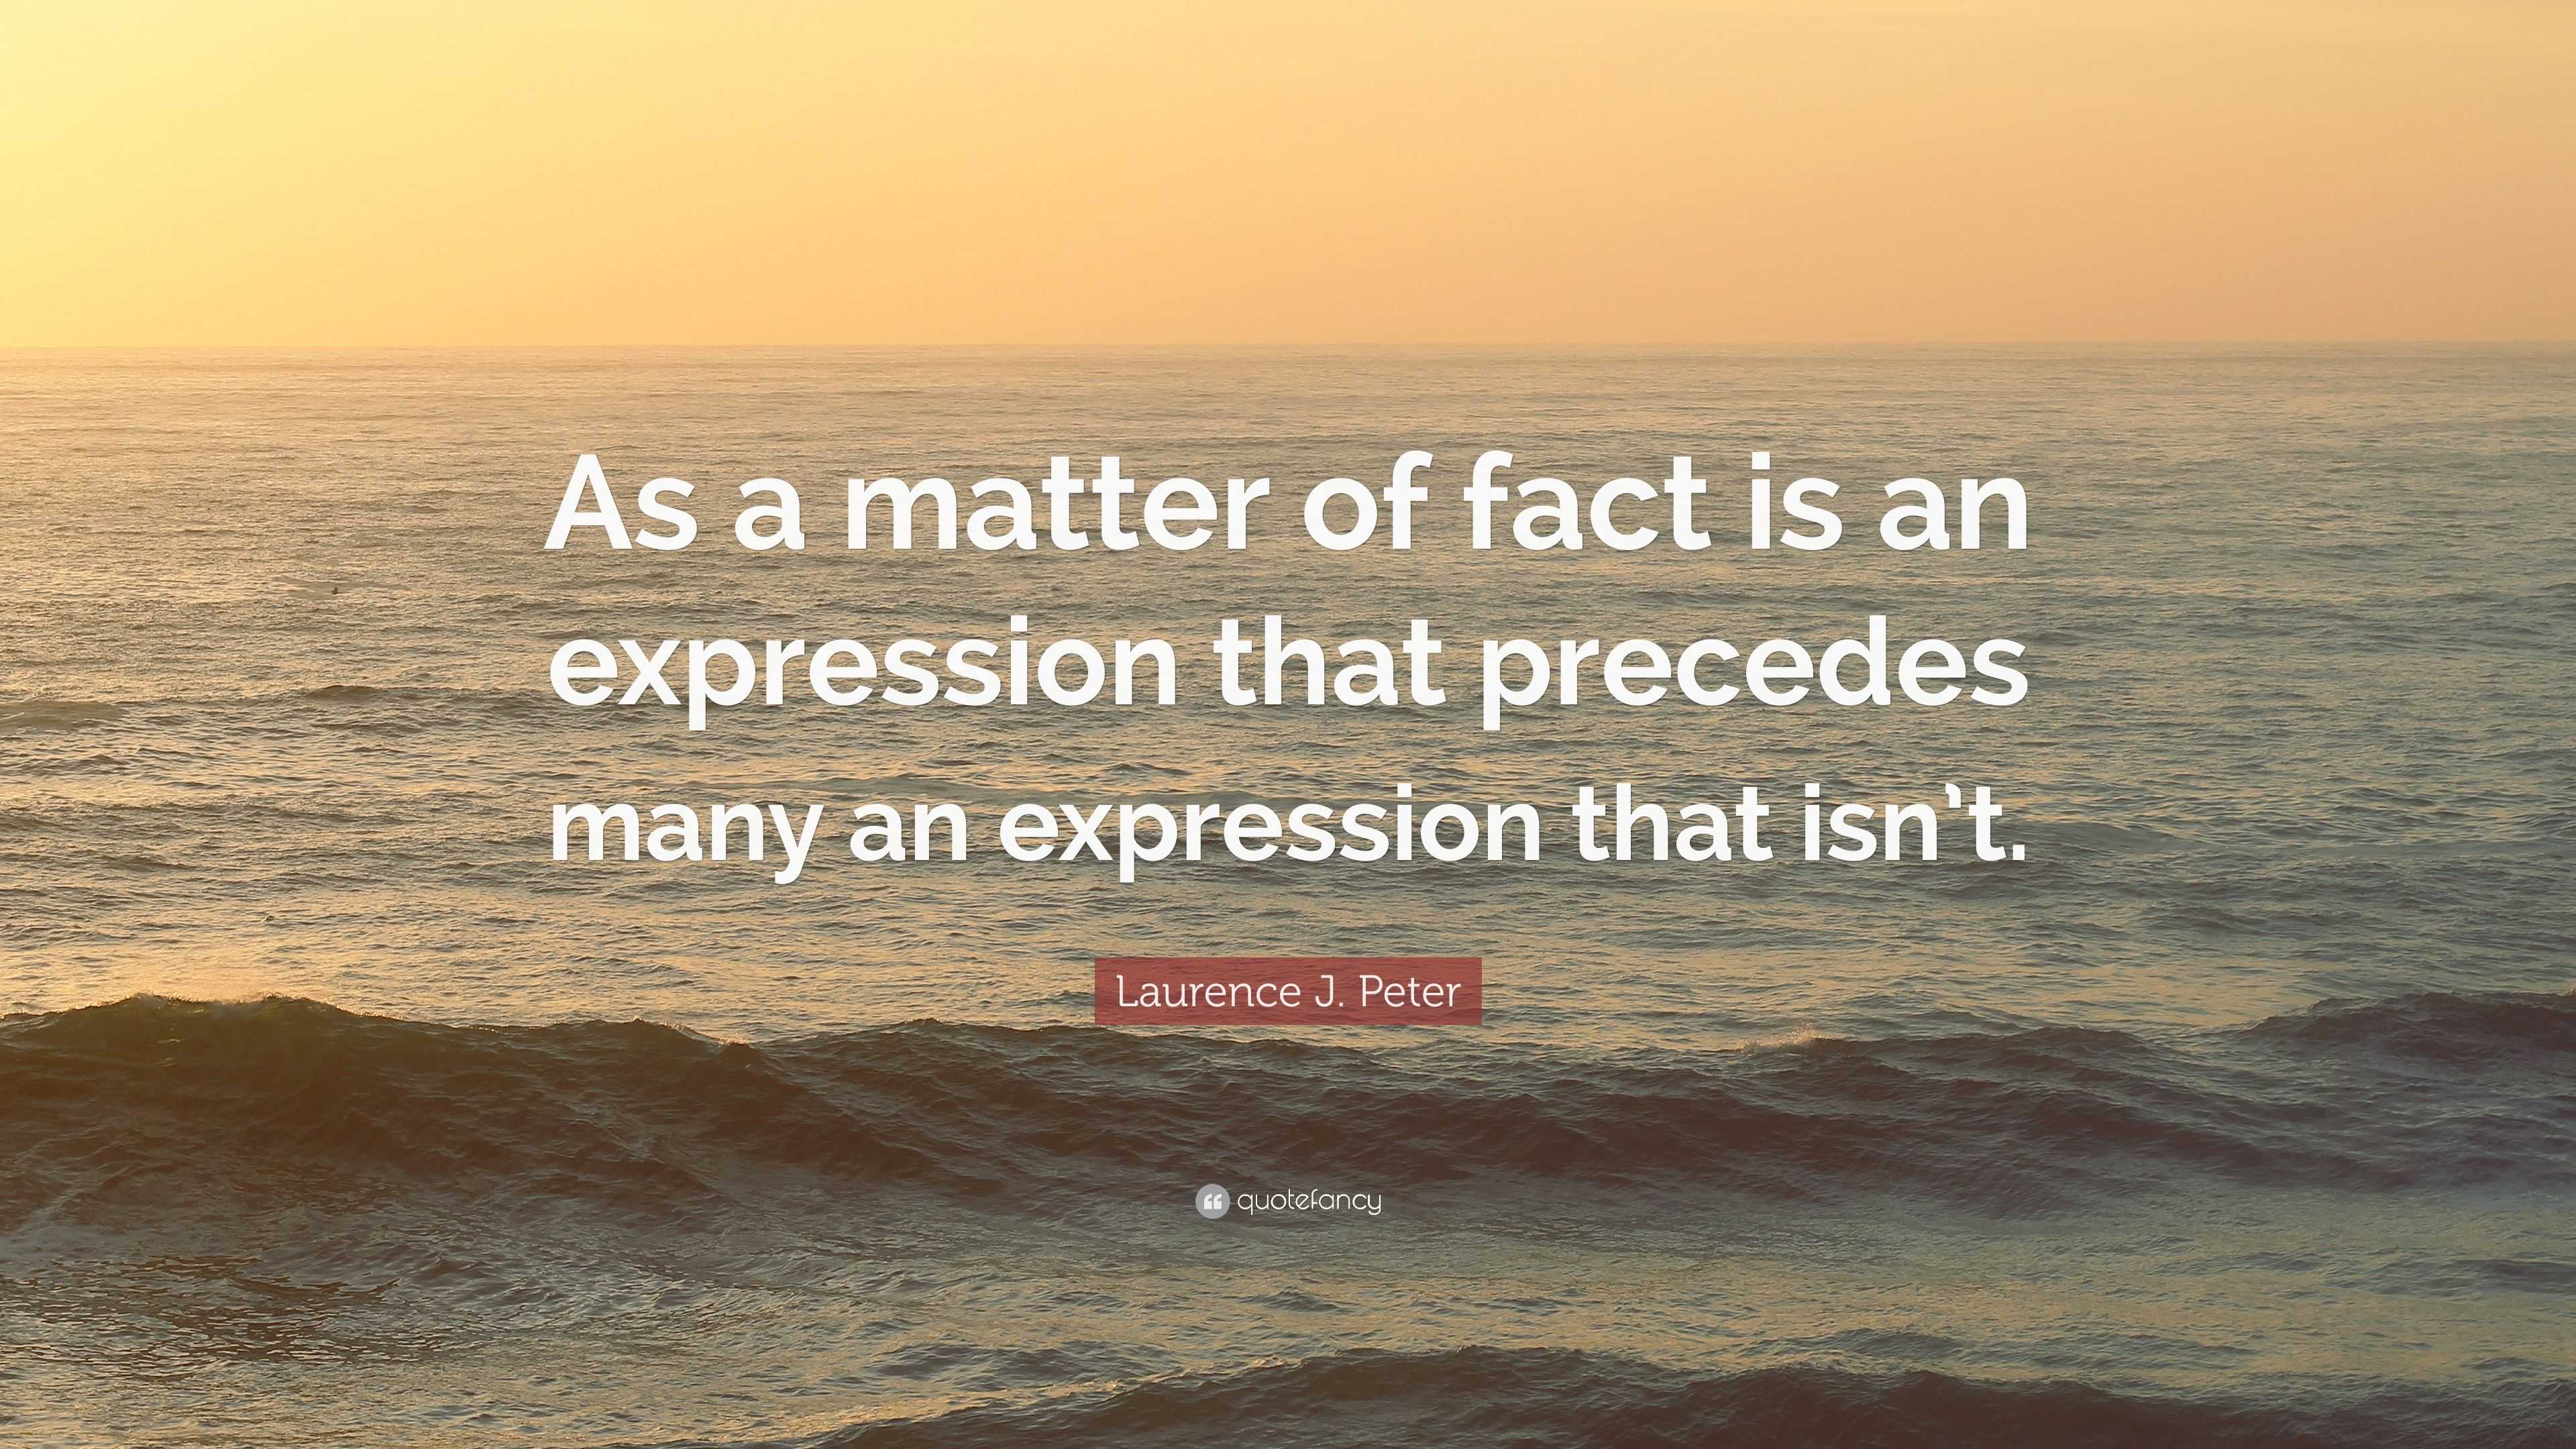 https://quotefancy.com/media/wallpaper/3840x2160/3879099-Laurence-J-Peter-Quote-As-a-matter-of-fact-is-an-expression-that.jpg